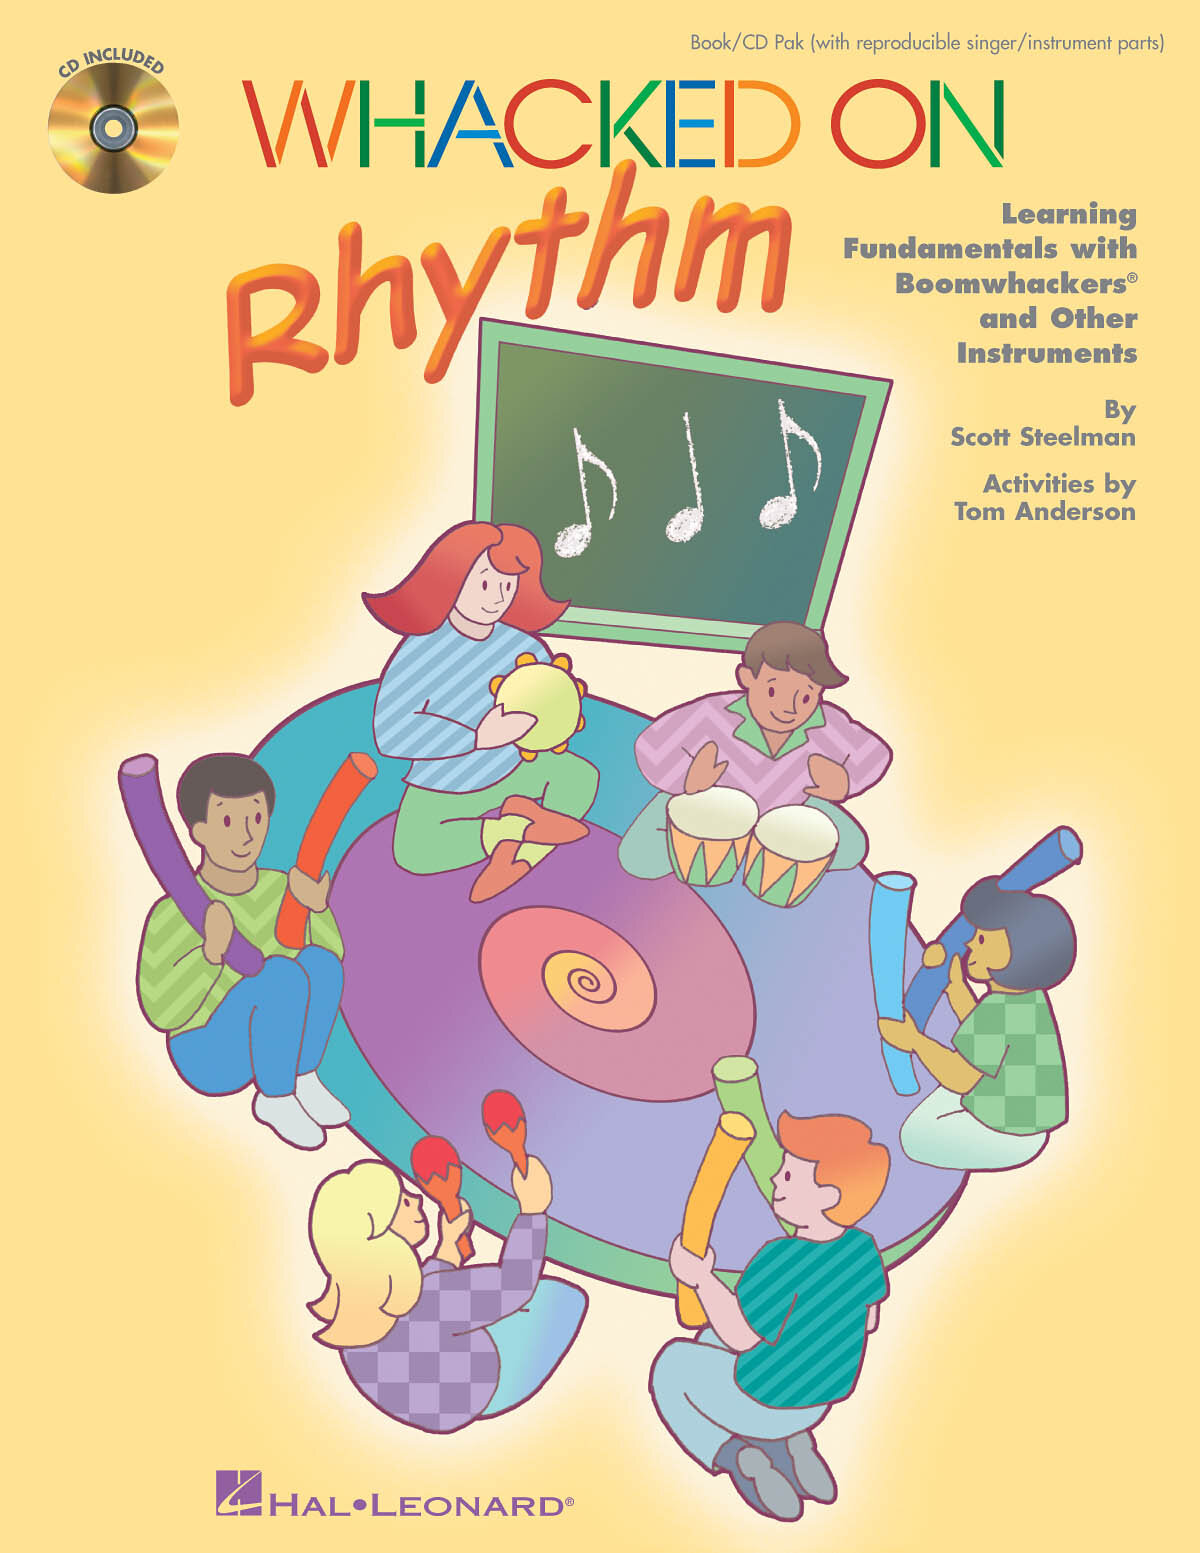 Hal Leonard Whacked on Rhythm Learning Fundamentals with Boomwhackers and Other Instruments Scott Steelman_Tom Anderson  Choir Buch + CD Musiktheorie HL09970718 (HL09970718) : photo 1